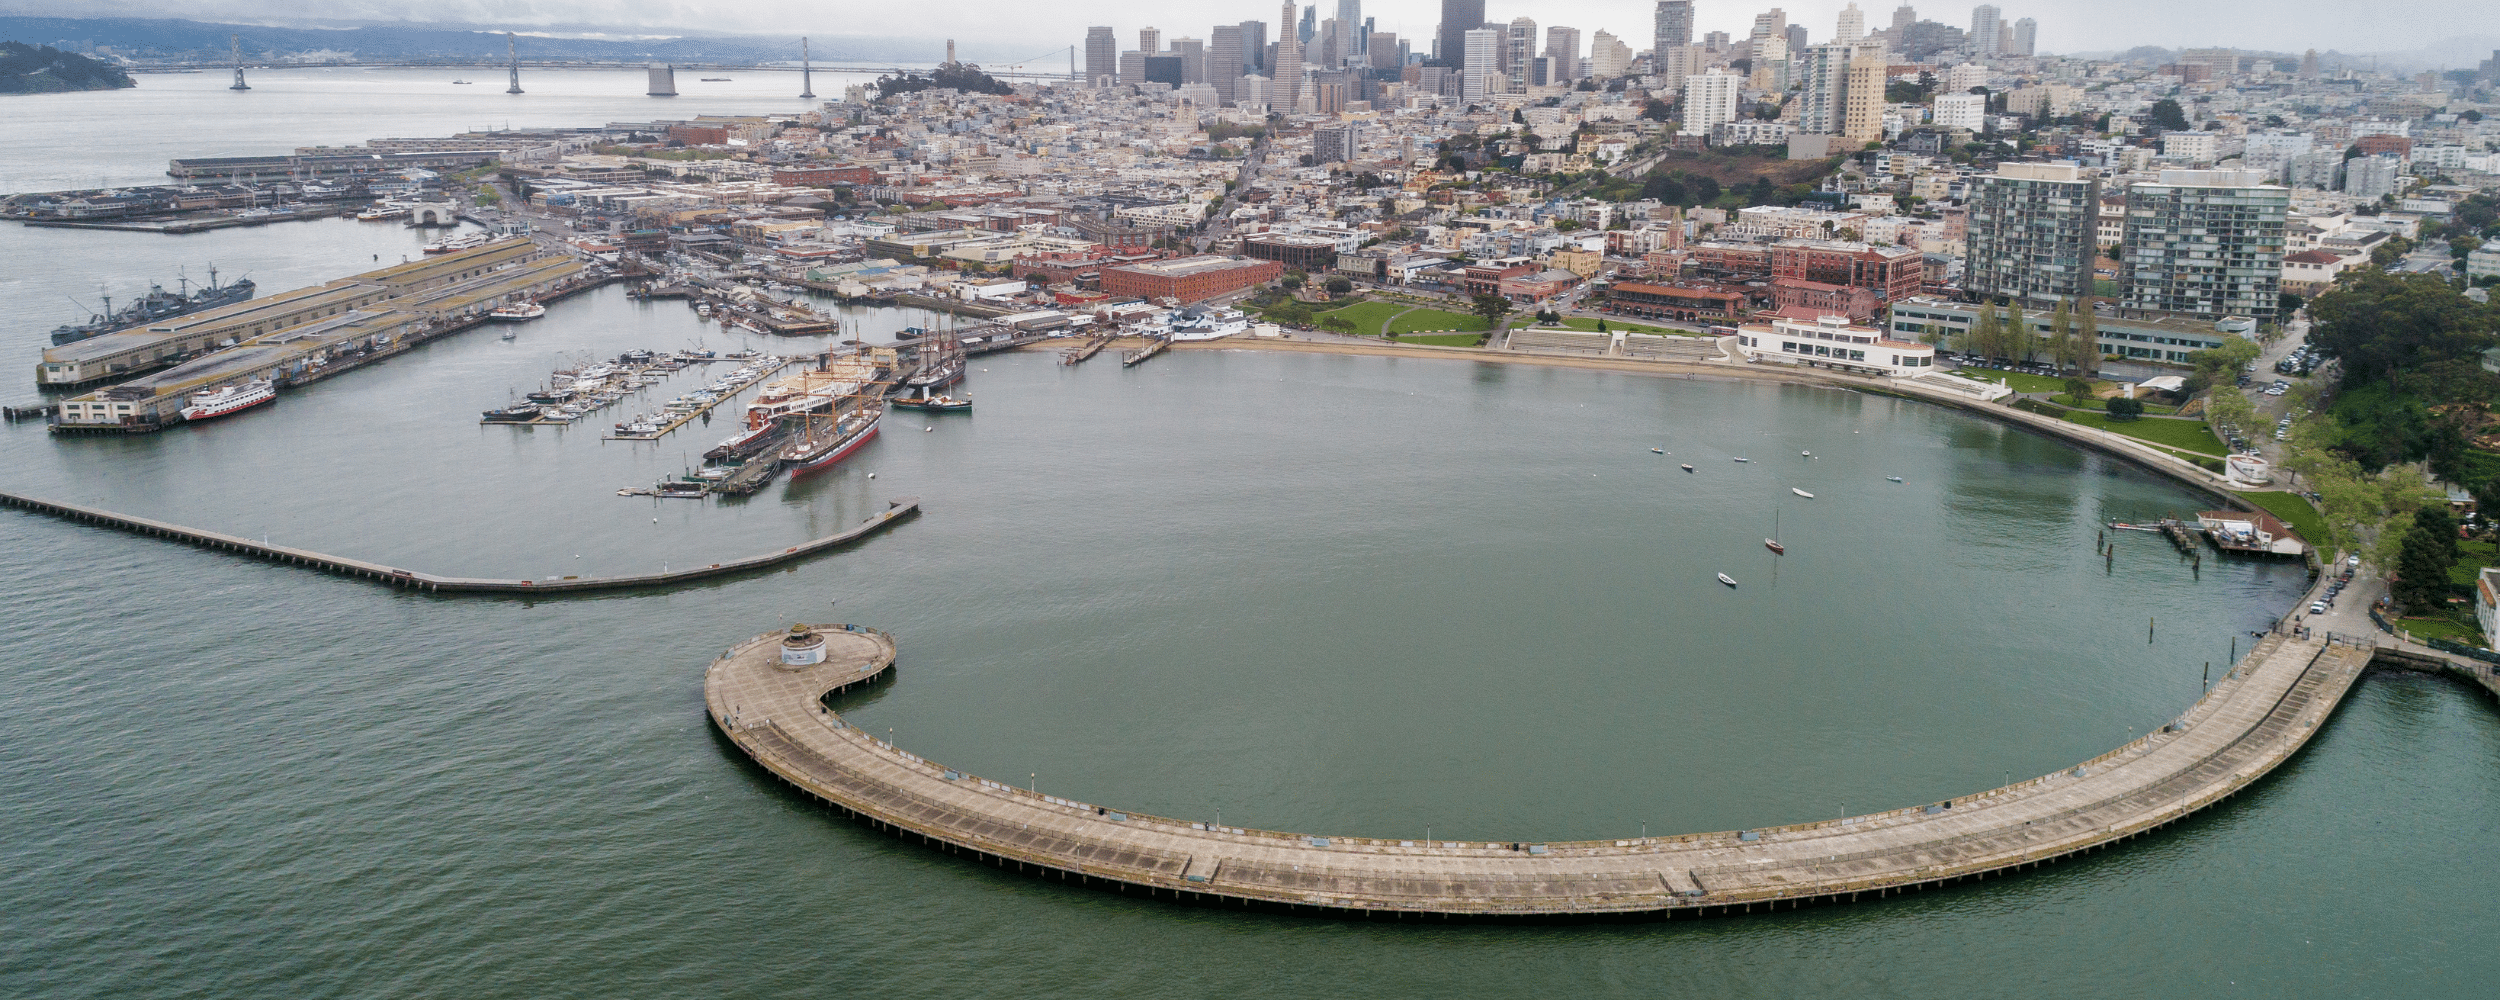 an ariel view of the aquatic park cove. ships, boats and people.